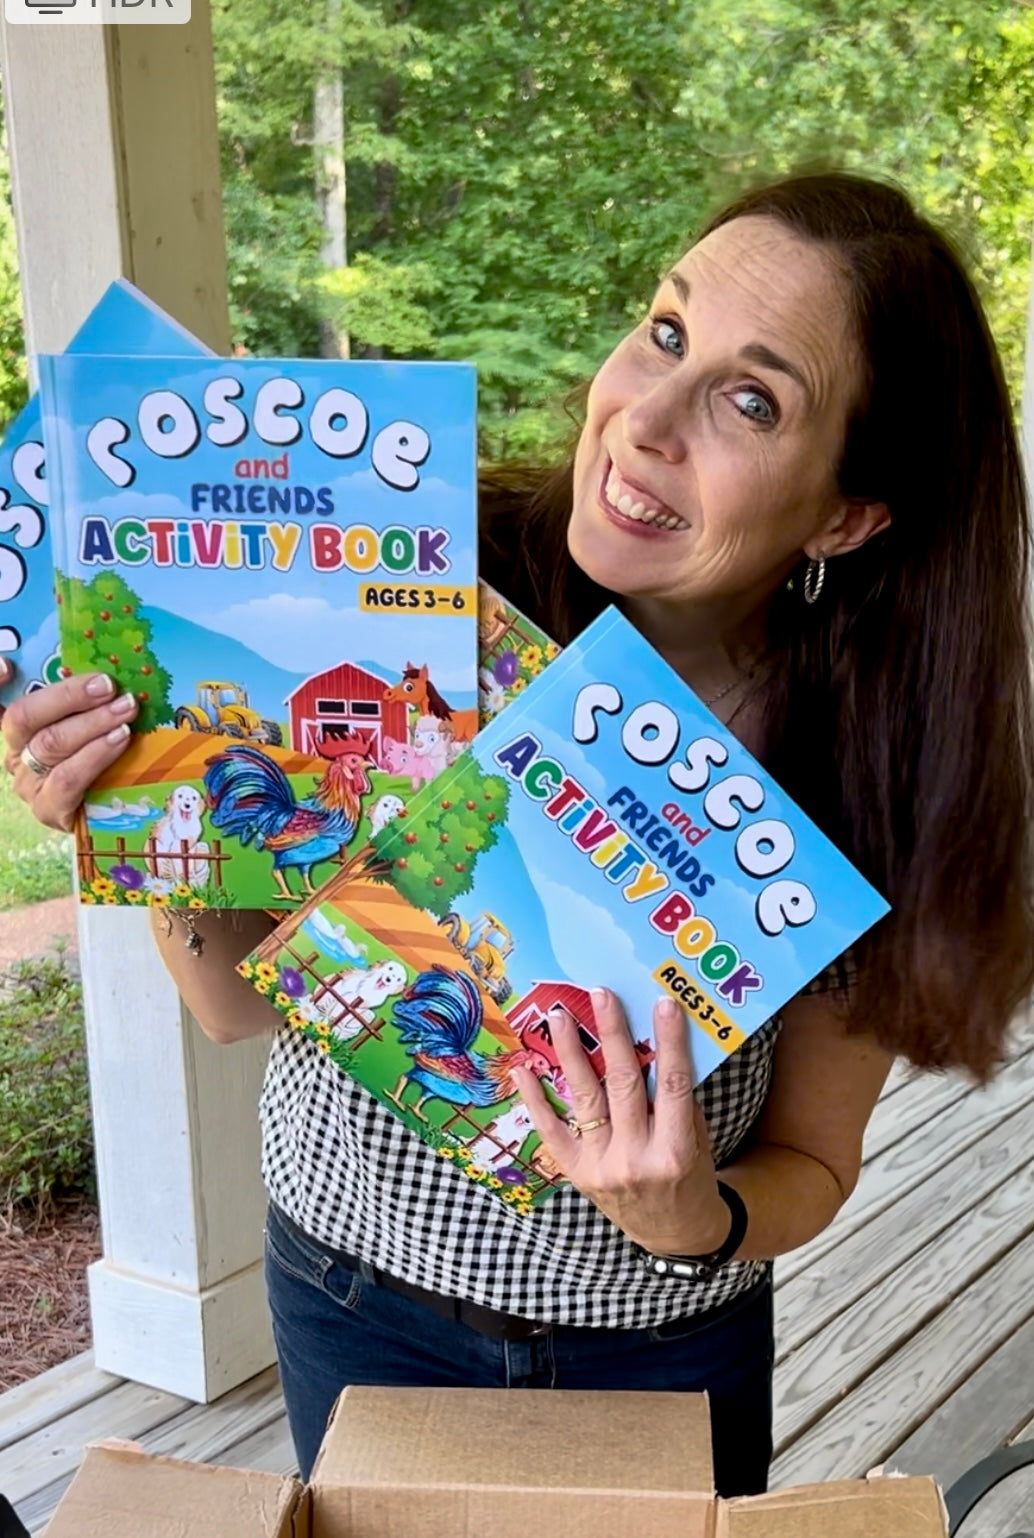 Roscoe and Friends Activity Book Ages 3-6